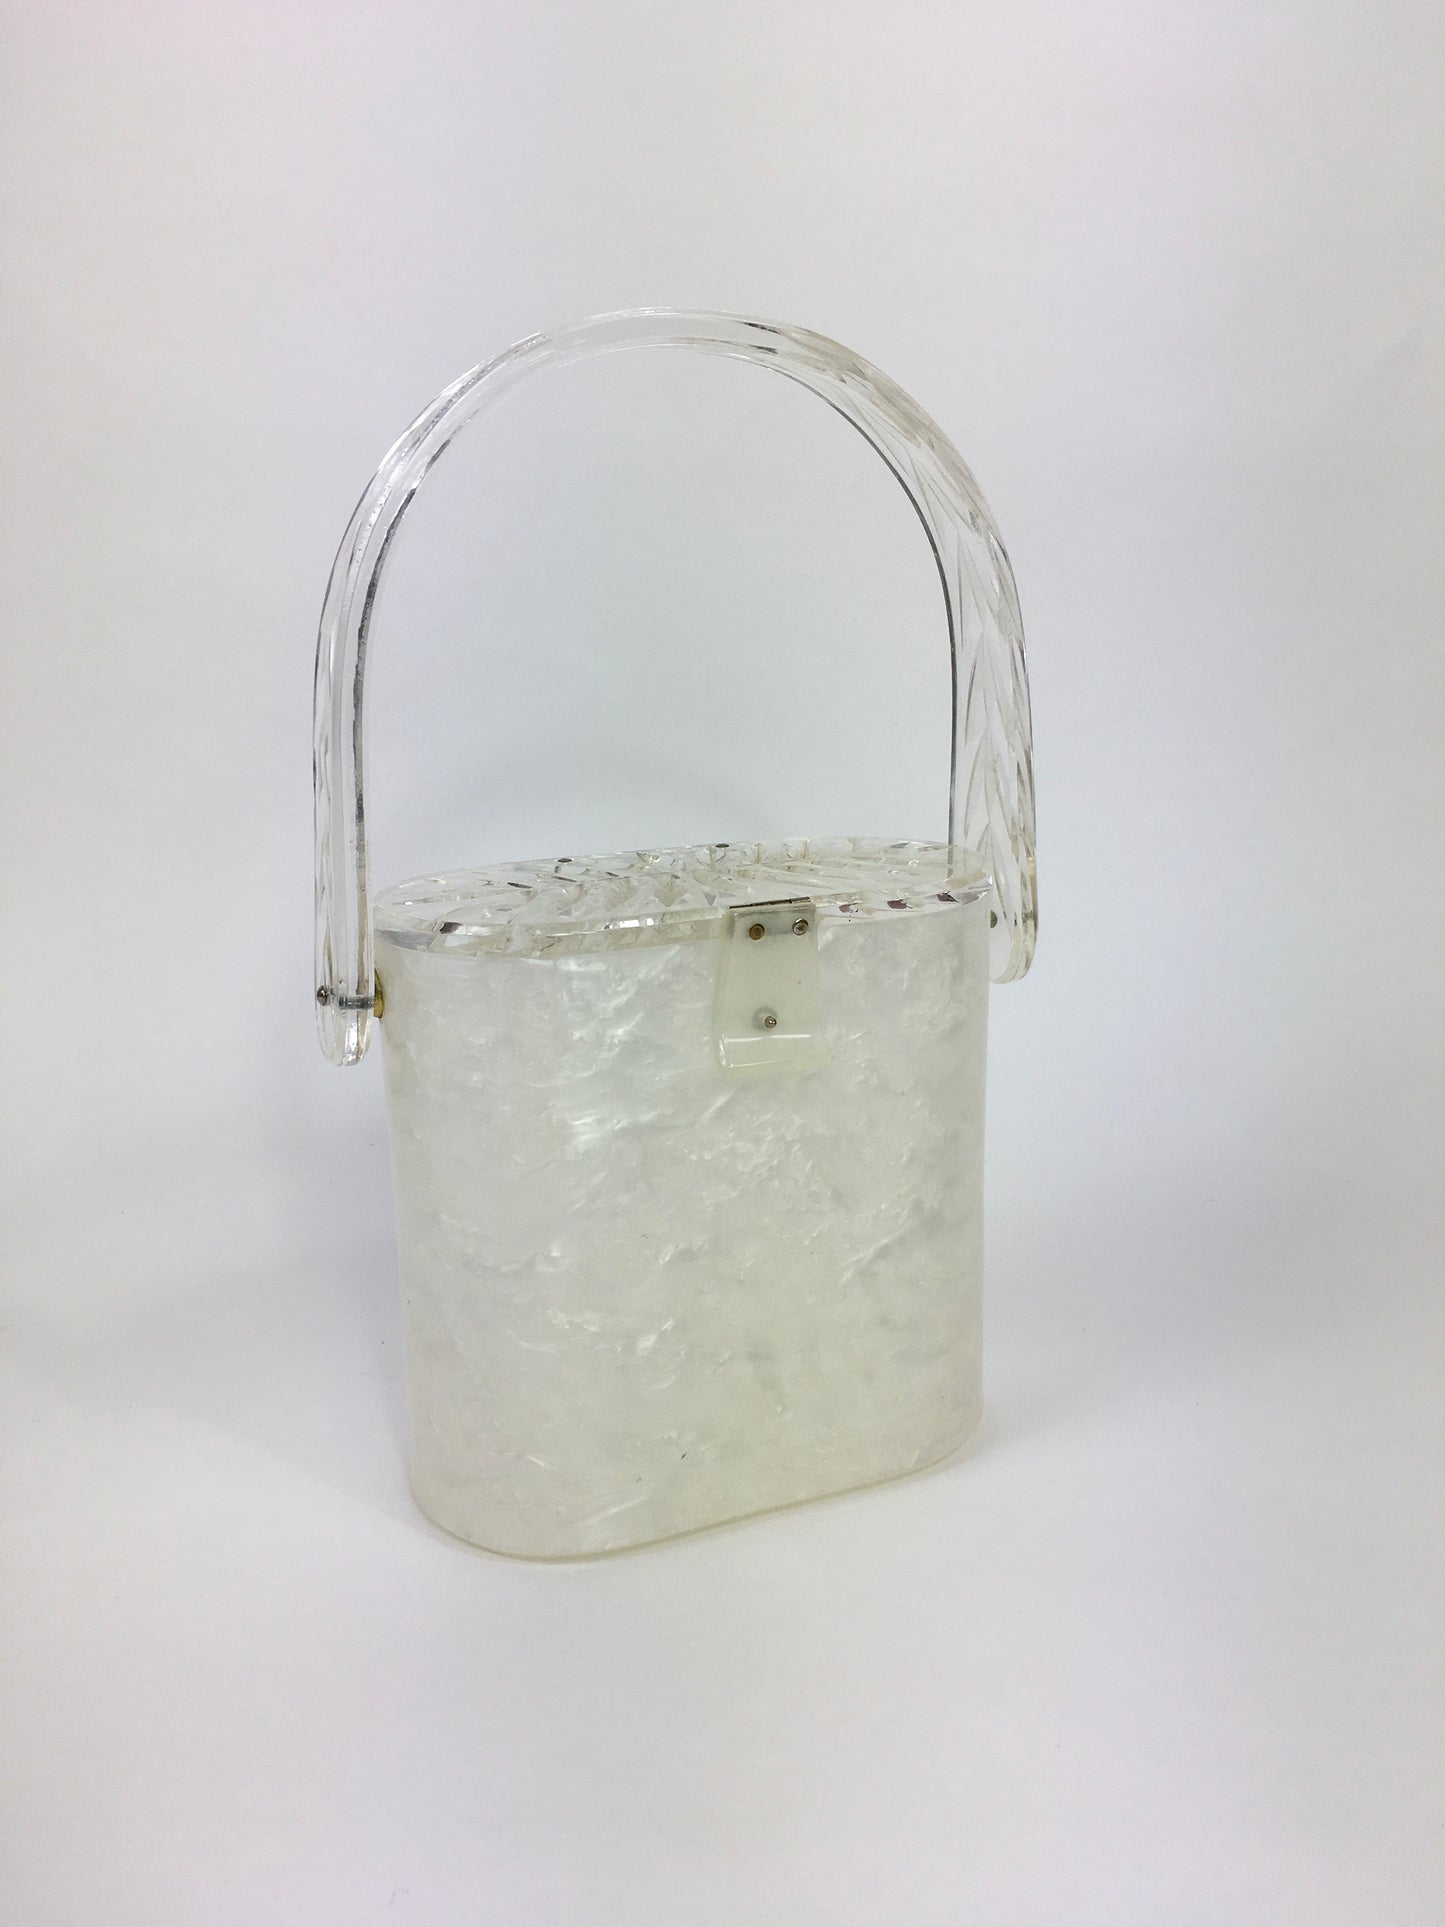 Original 1950s Lucite Handbag - White Marbled Base and Clear Leaf Design Lucite Lid and Handle